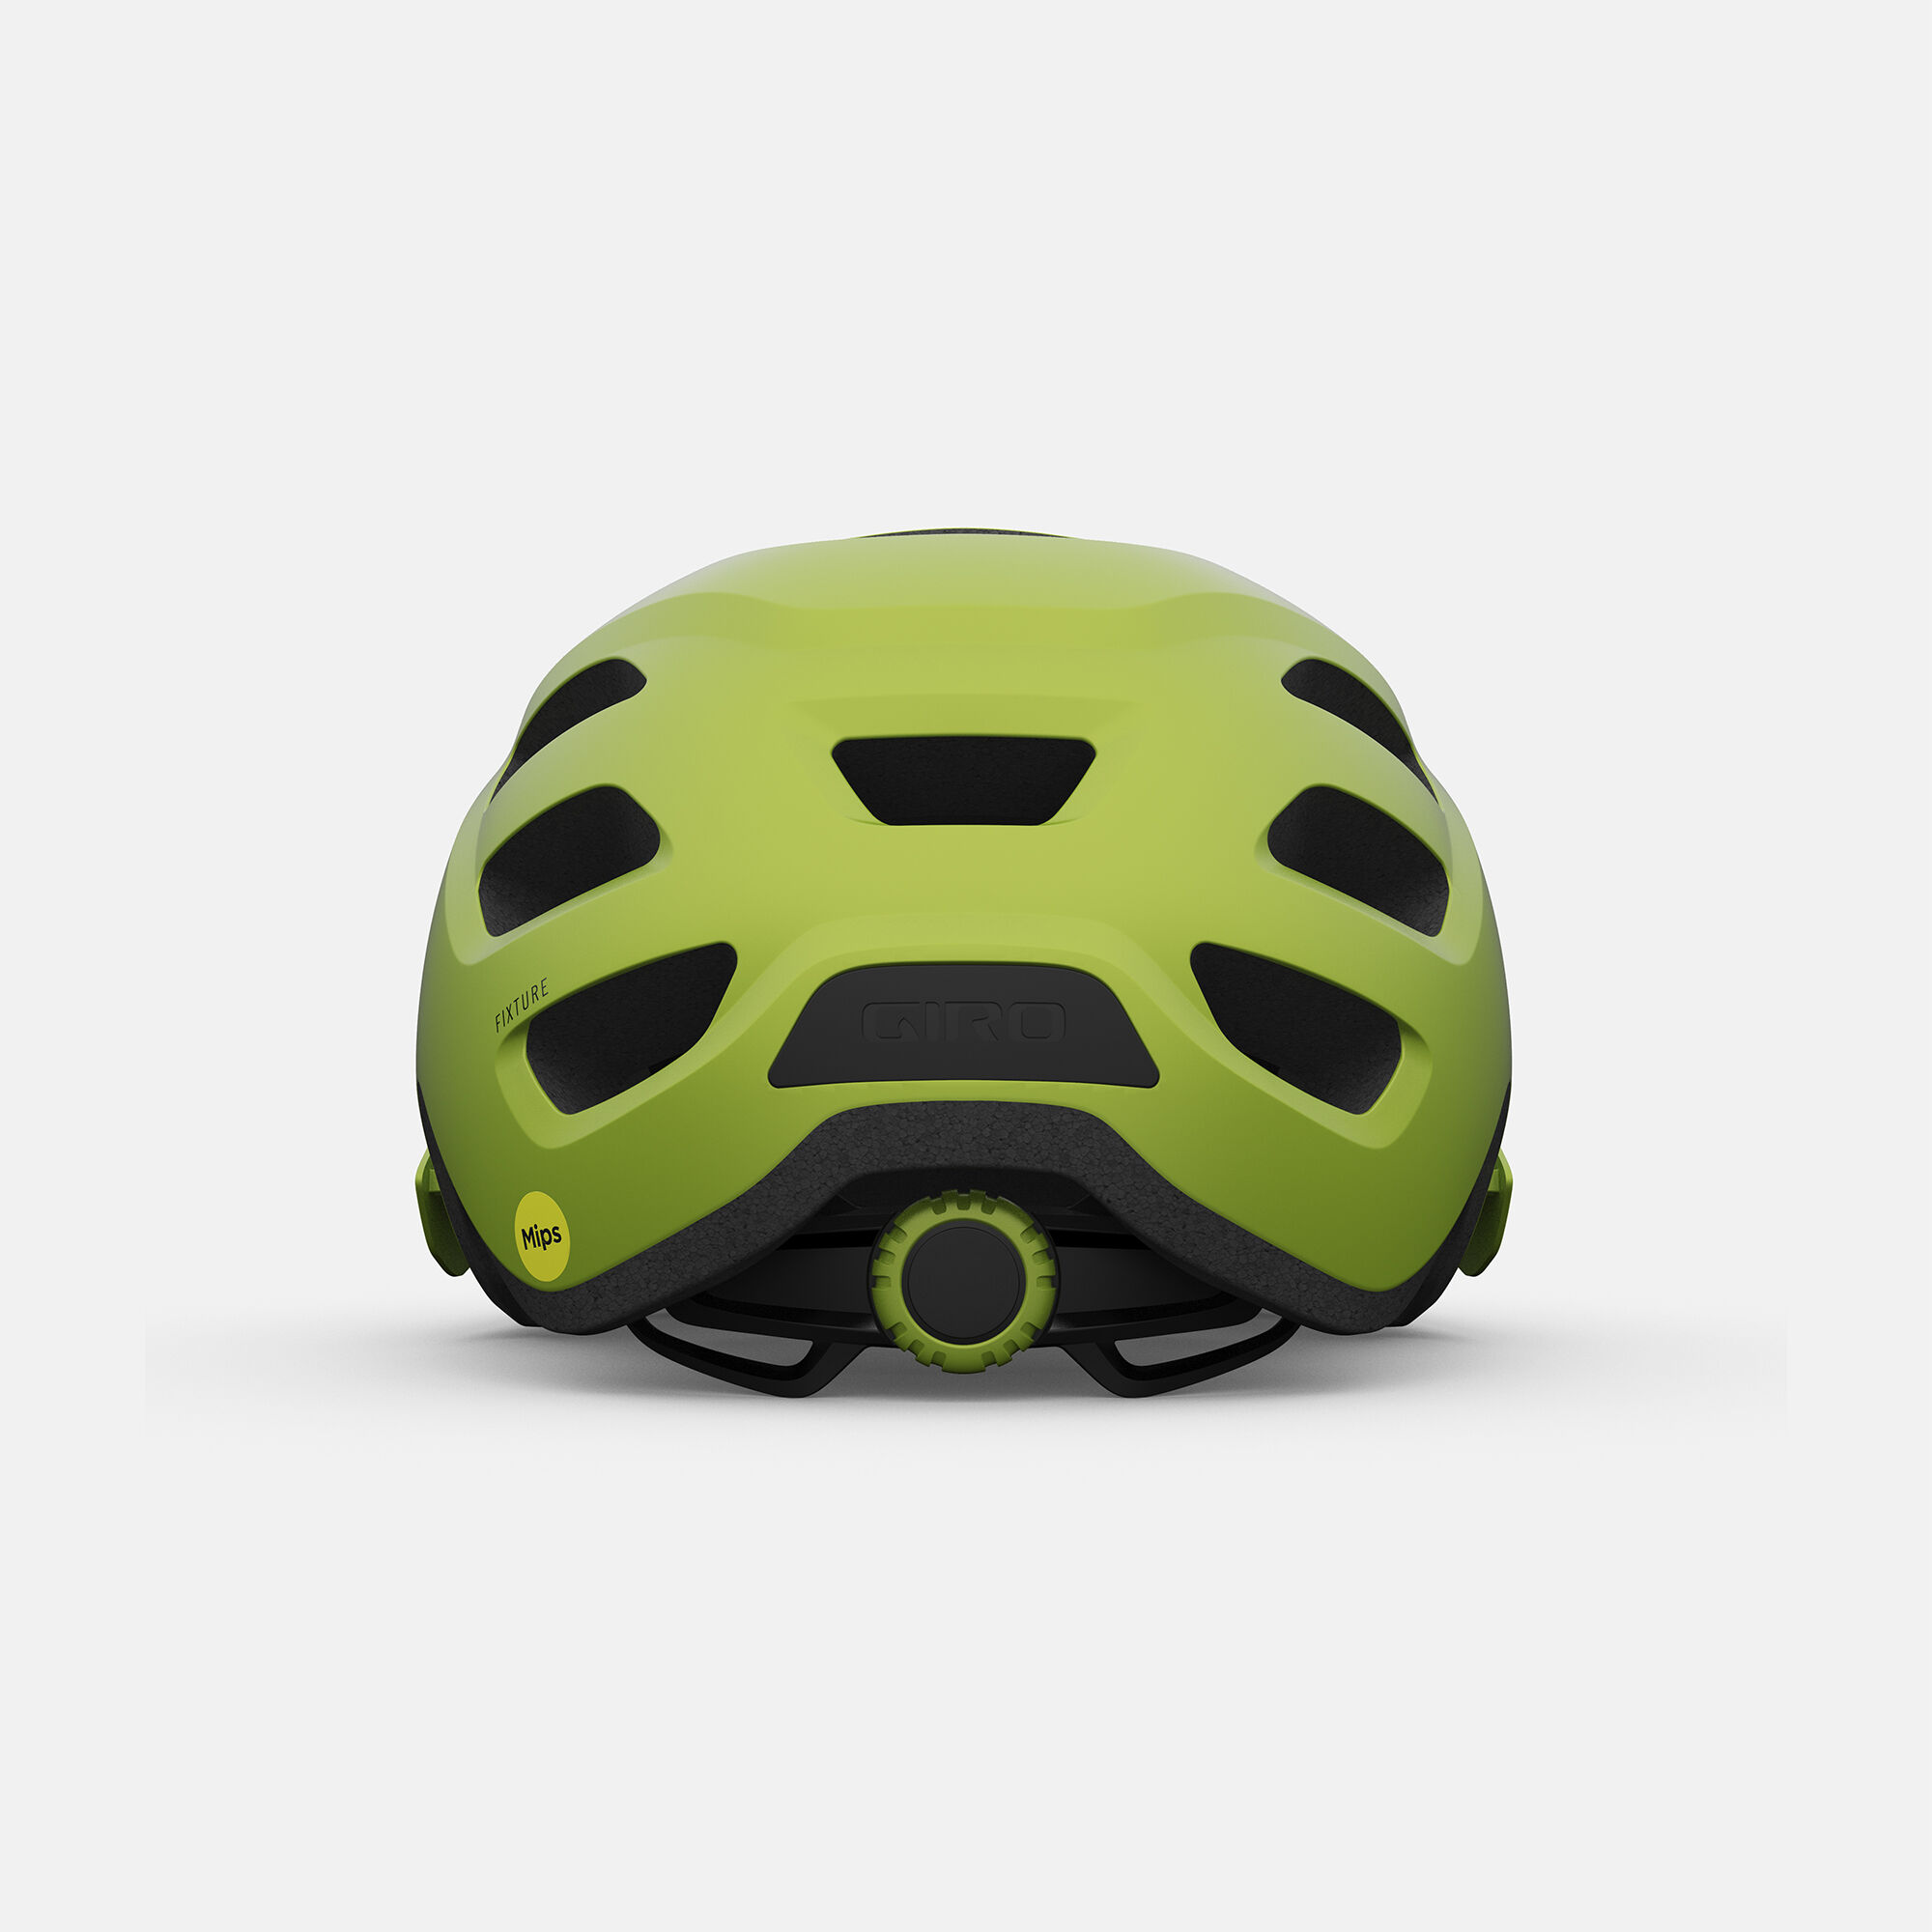 New Details about   Giro Adult Fixture MIPS Bike Helmet Free Shipping 